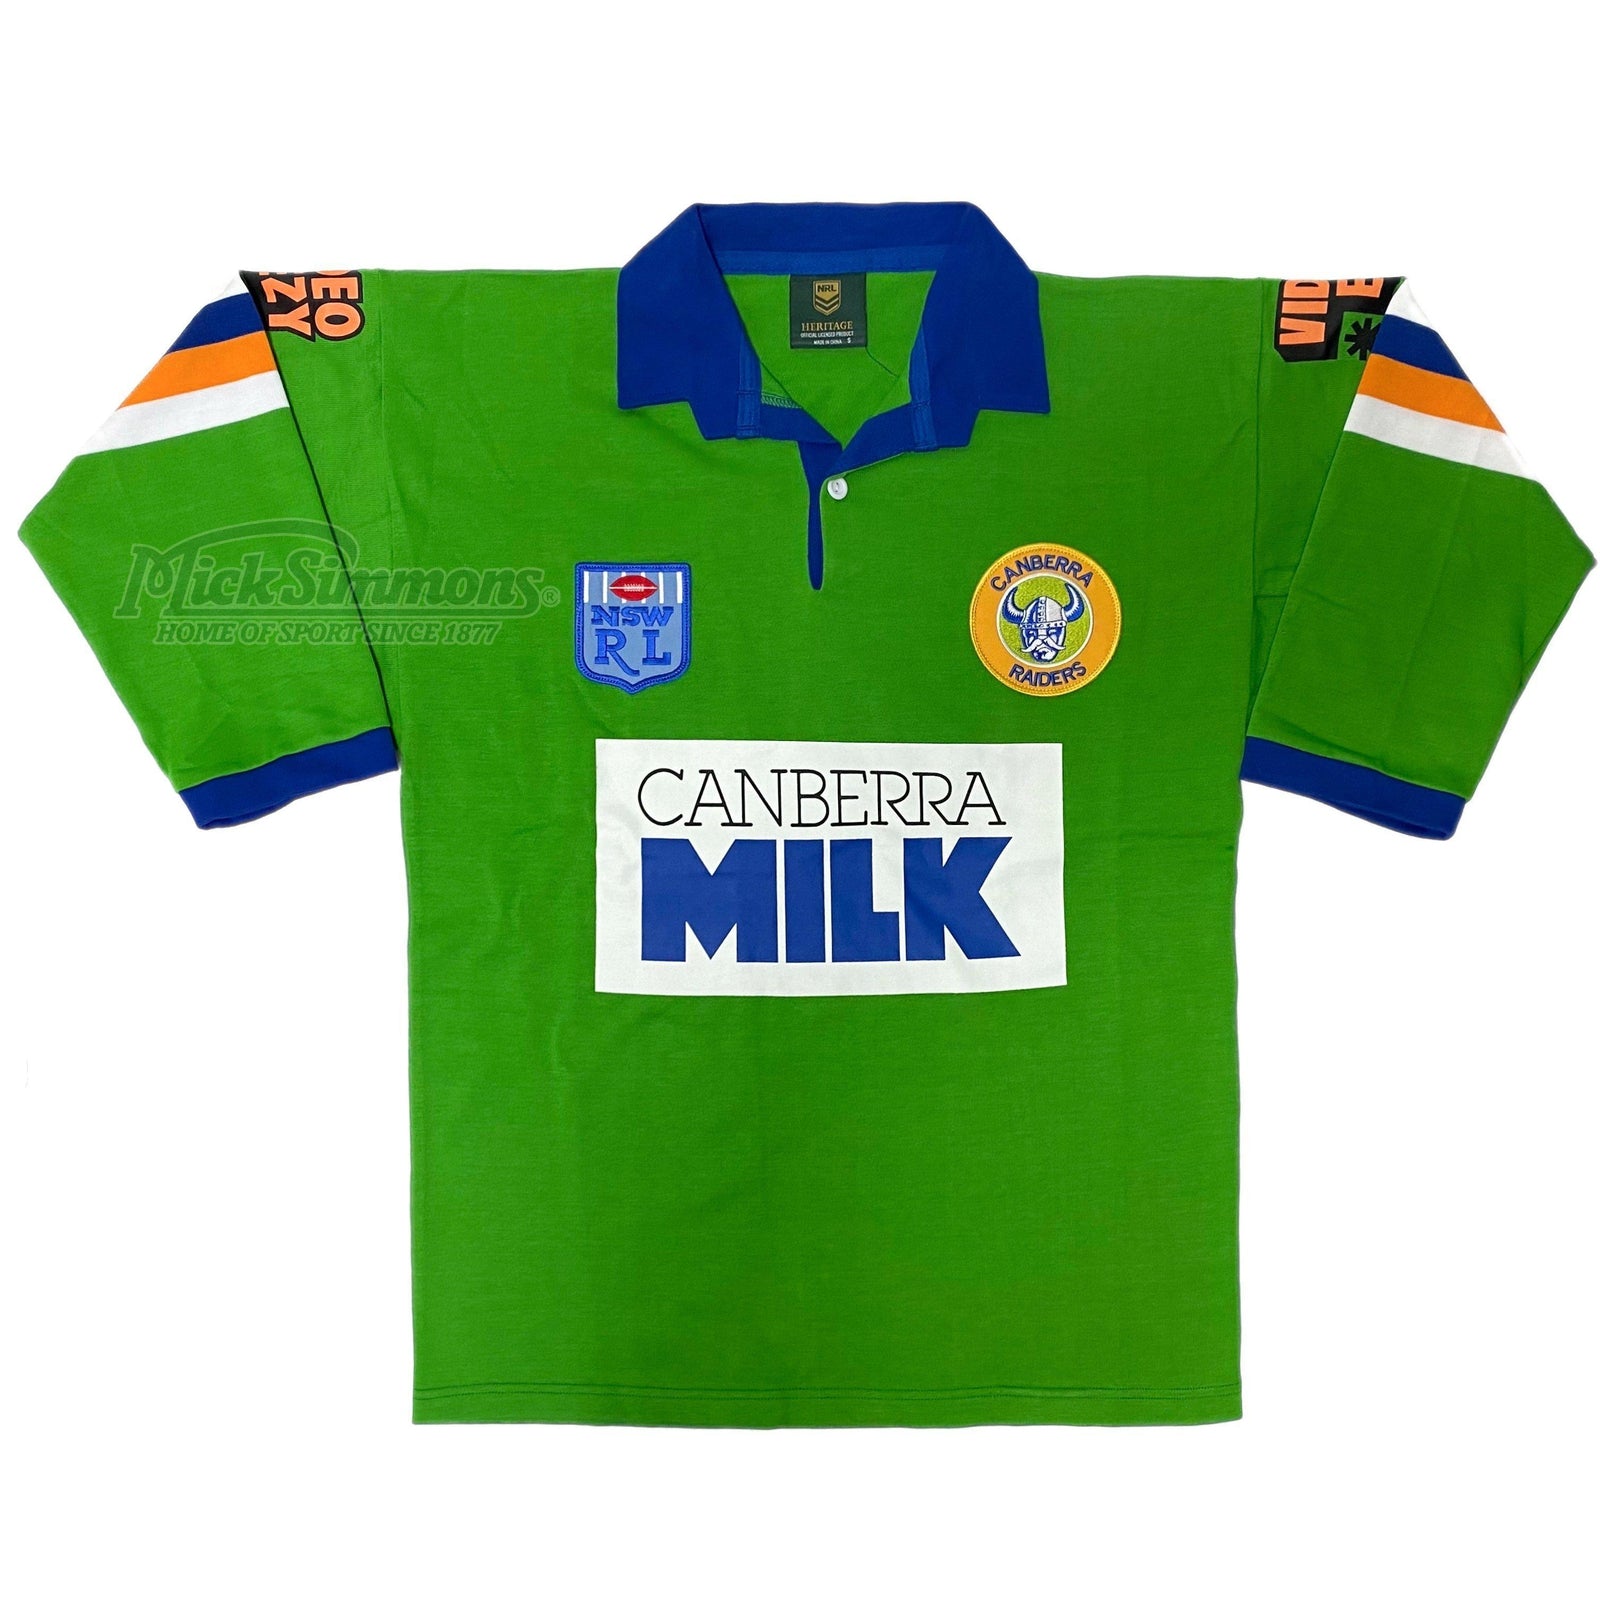 NRL CANBERRA RAIDERS JERSEY